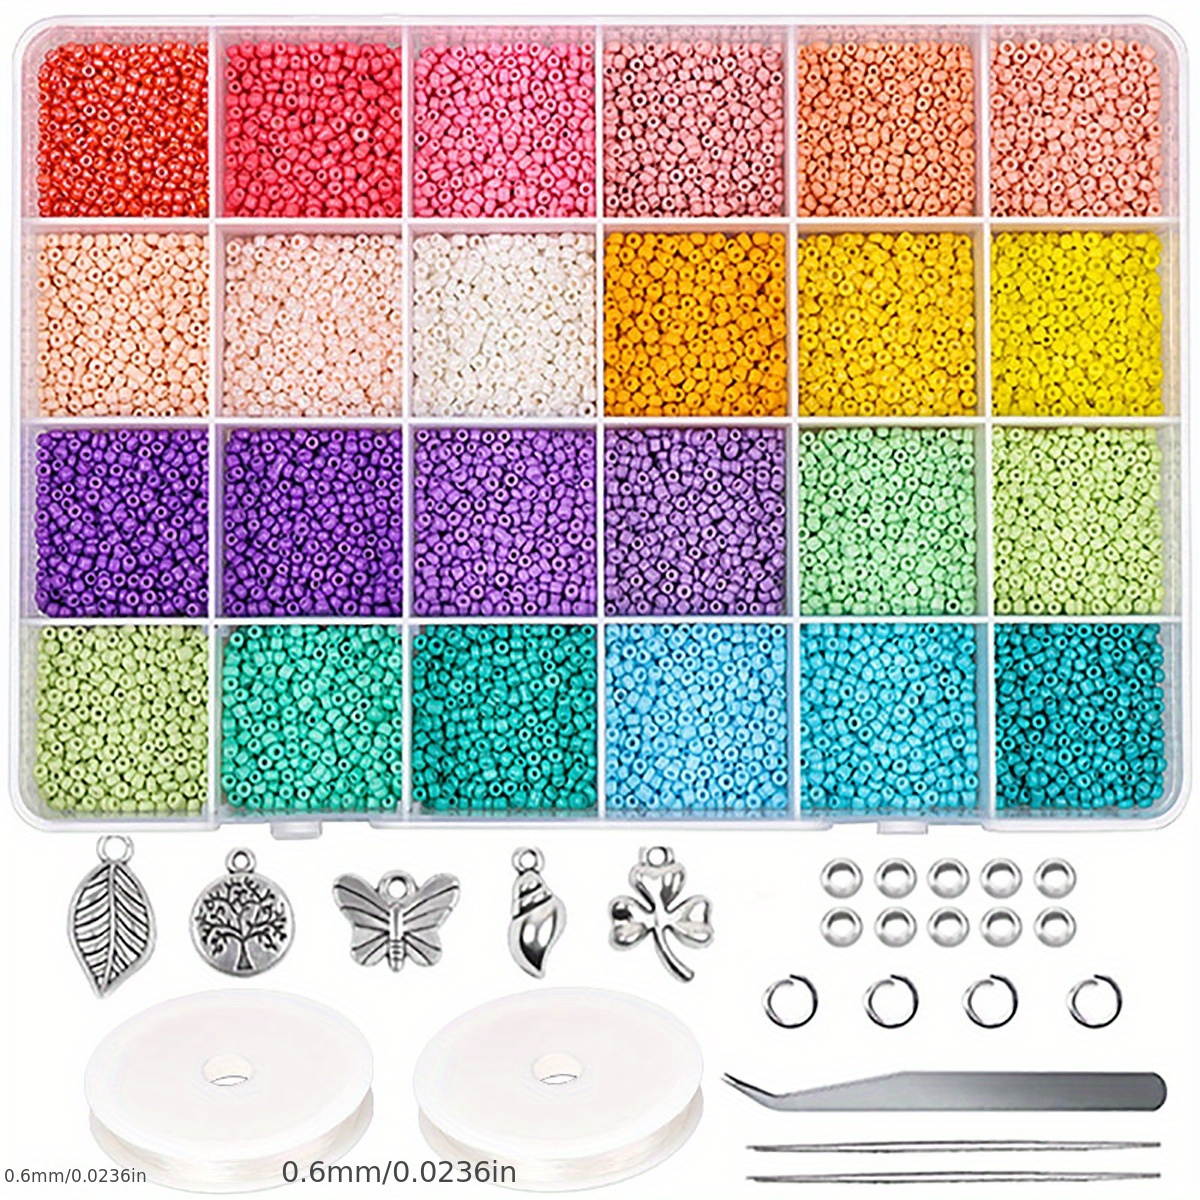 35000pcs 2mm 12/0 Glass Seed Beads For Jewelry Making Supplies Kit